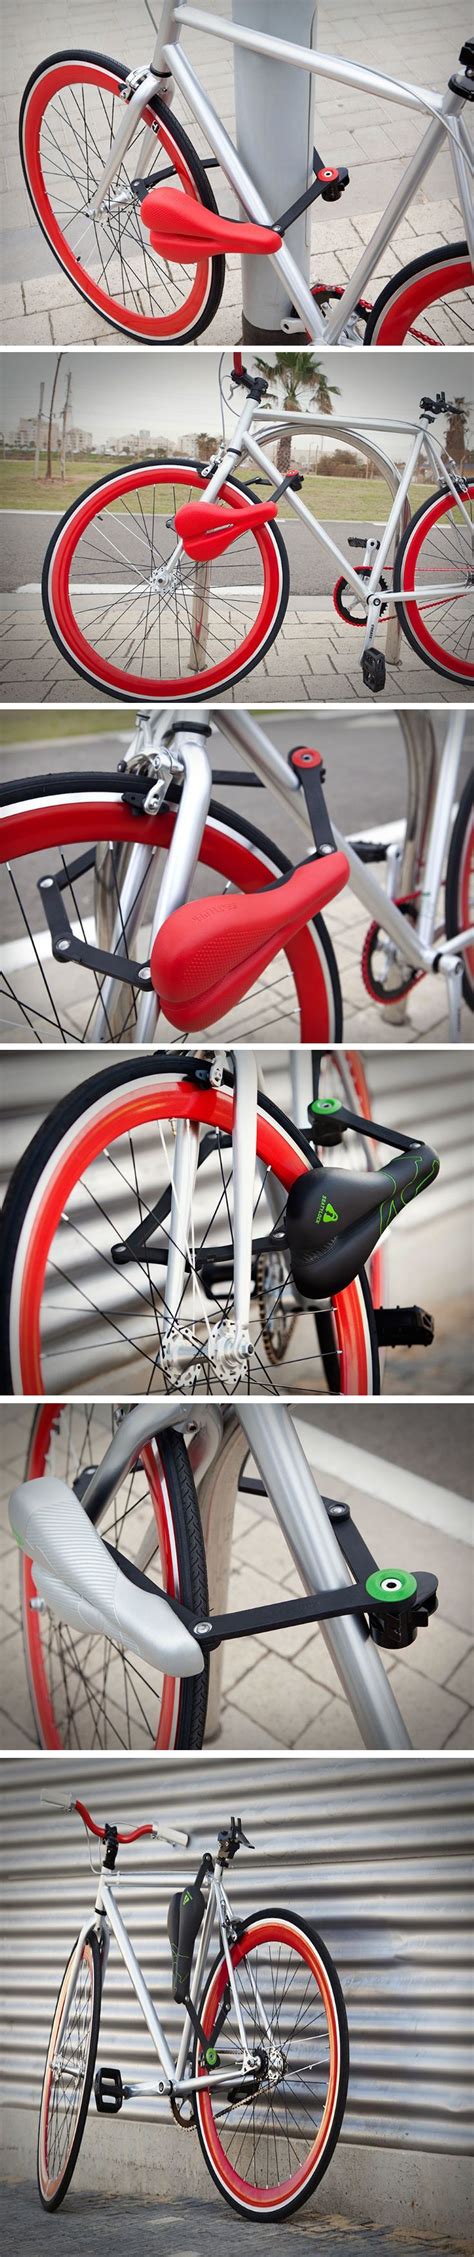 Not Only Does The Seatylock Help Secure Your Bike Safely To Any Immovable Object It Also